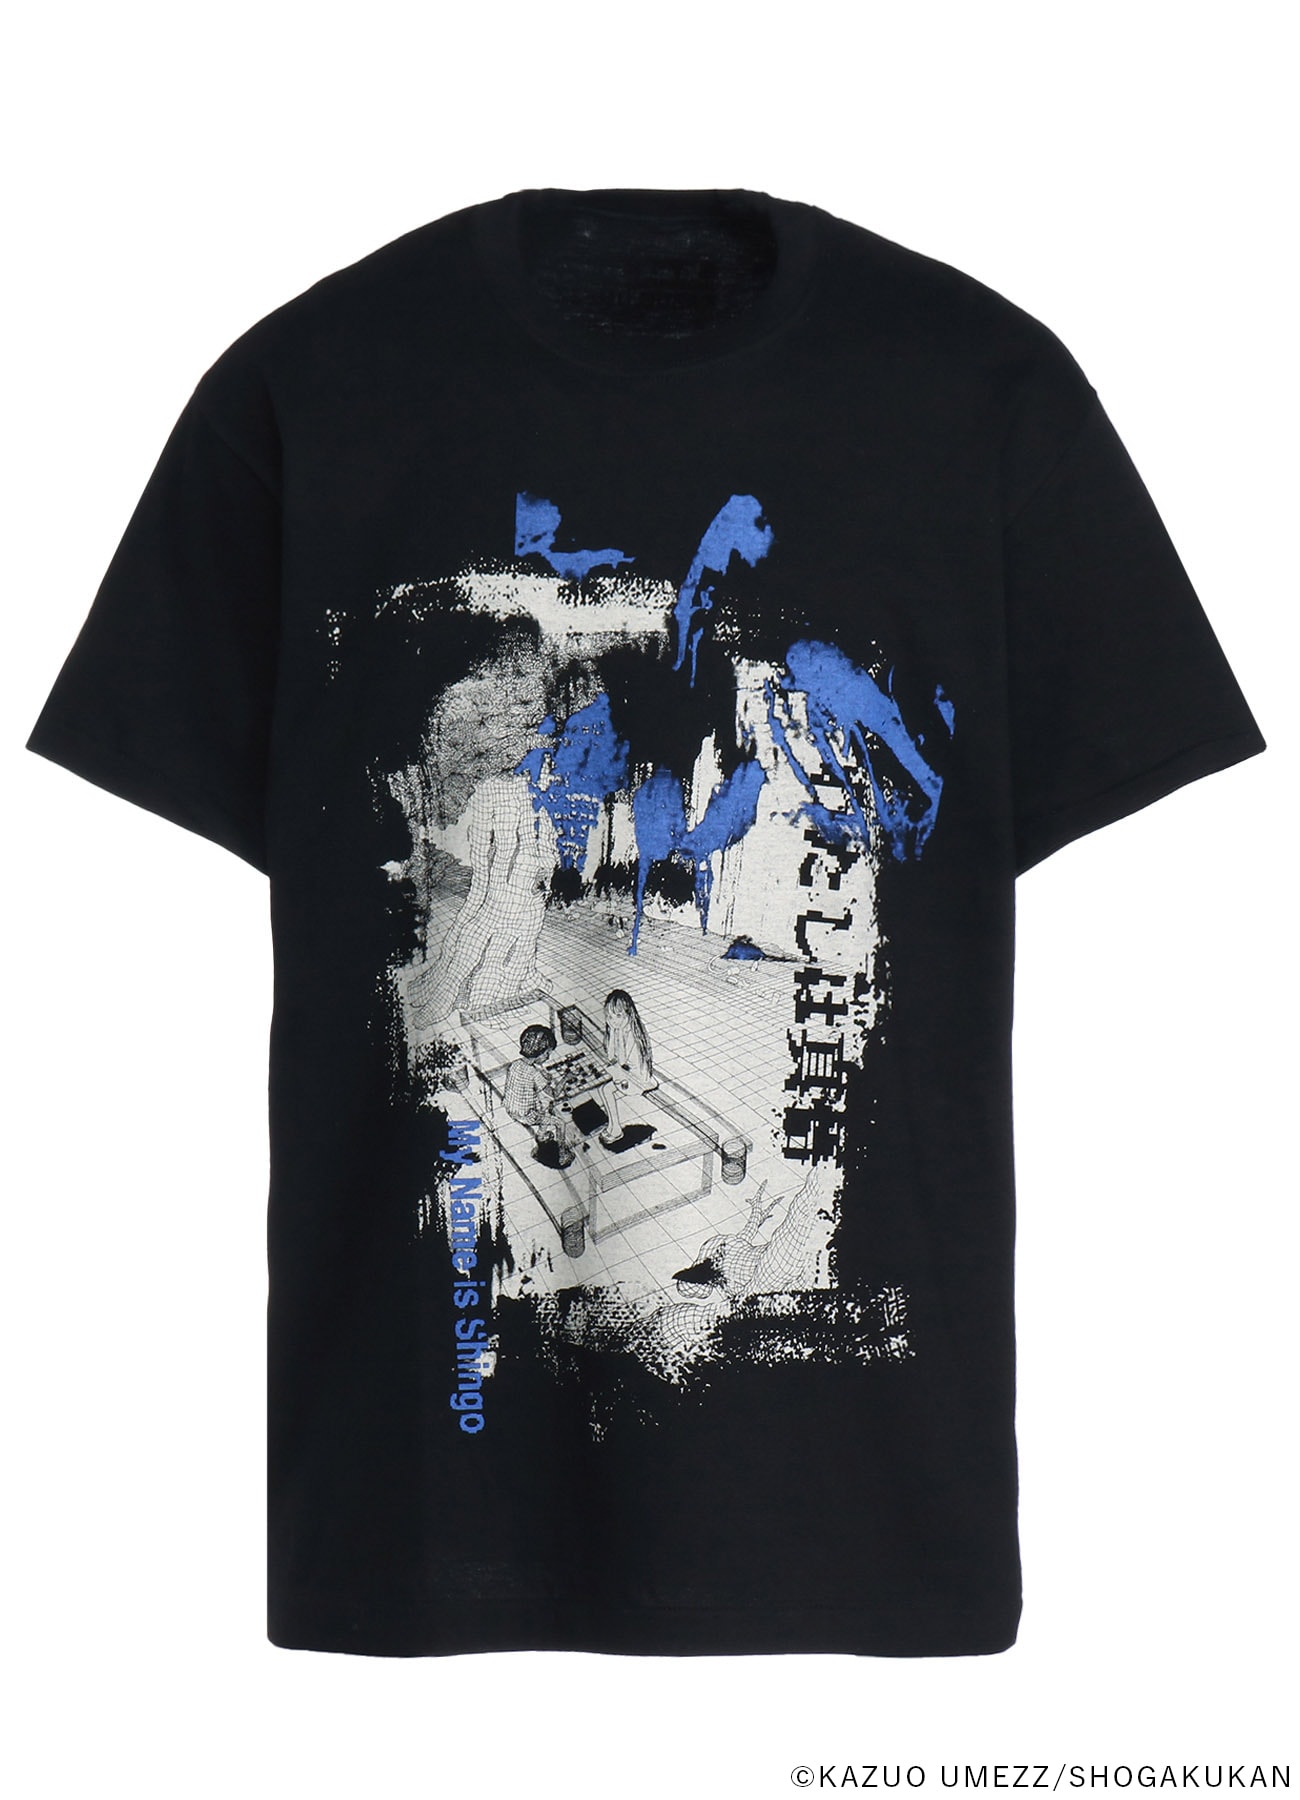 S'YTExKAZUO UMEZZ-MY NAME IS SHINGO-T-SHIRT PRINTED WITH COVER ART”Cyber world”